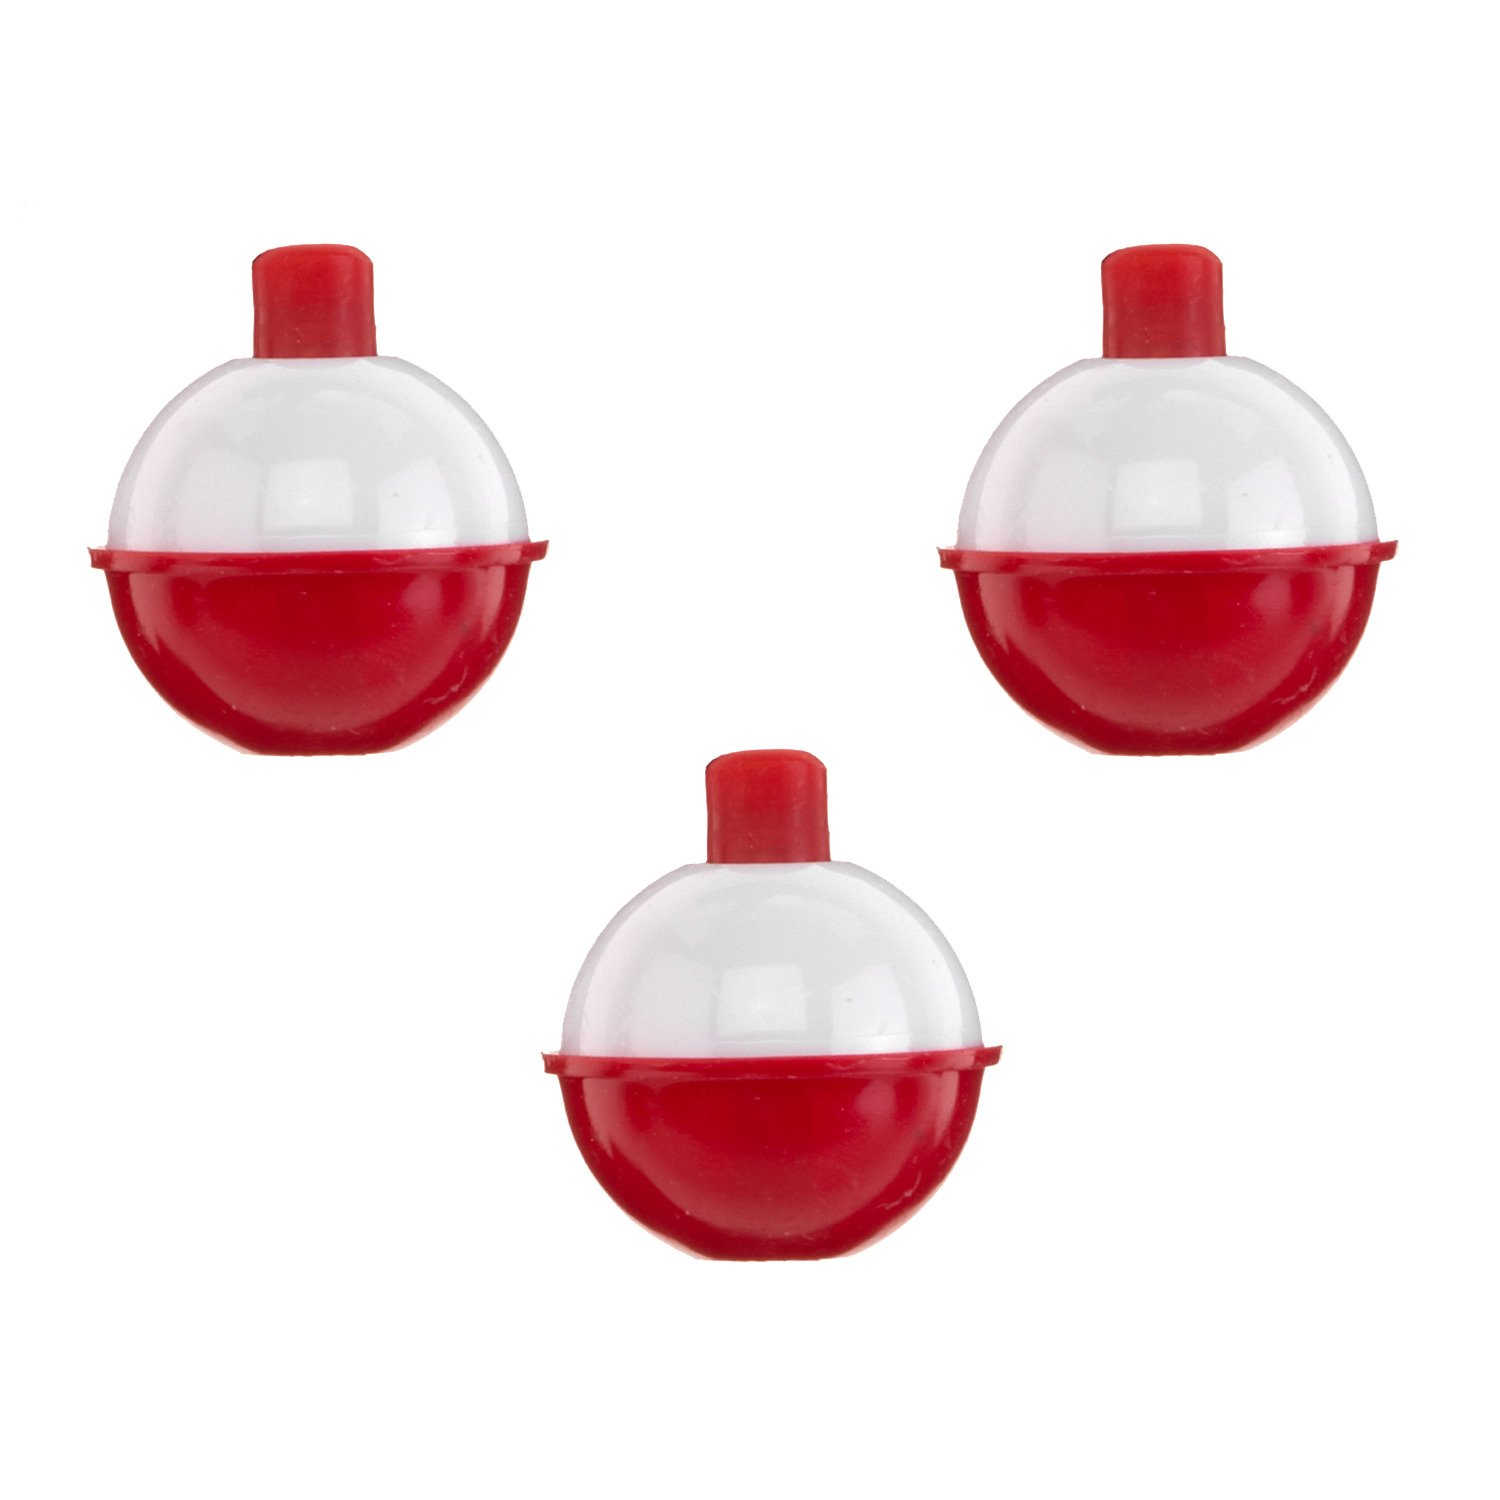 10 Pack of 3/4 Red and White Round Fishing Bobbers - classic fishing floats